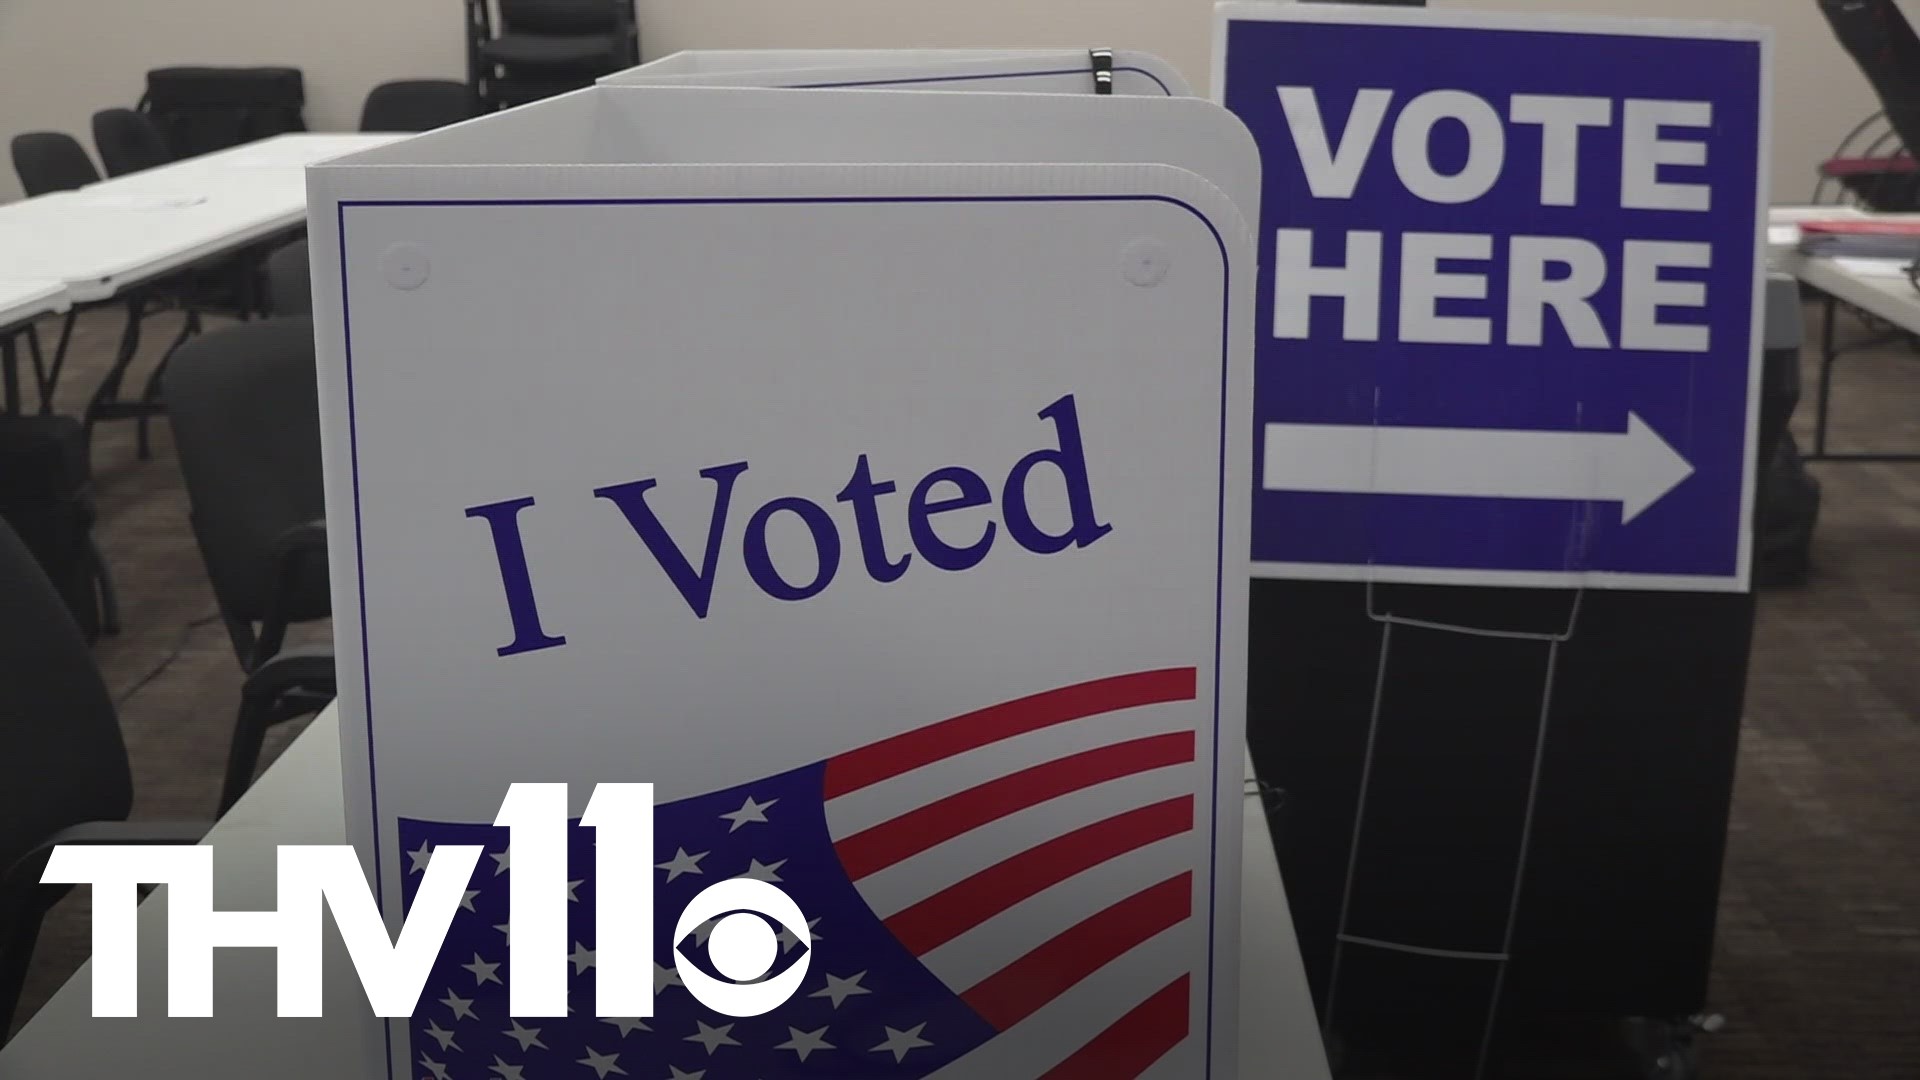 We're less than a day away from the first ballots being casted in the Arkansas primary election and the NAACP is working to improve voter turnout for this year.